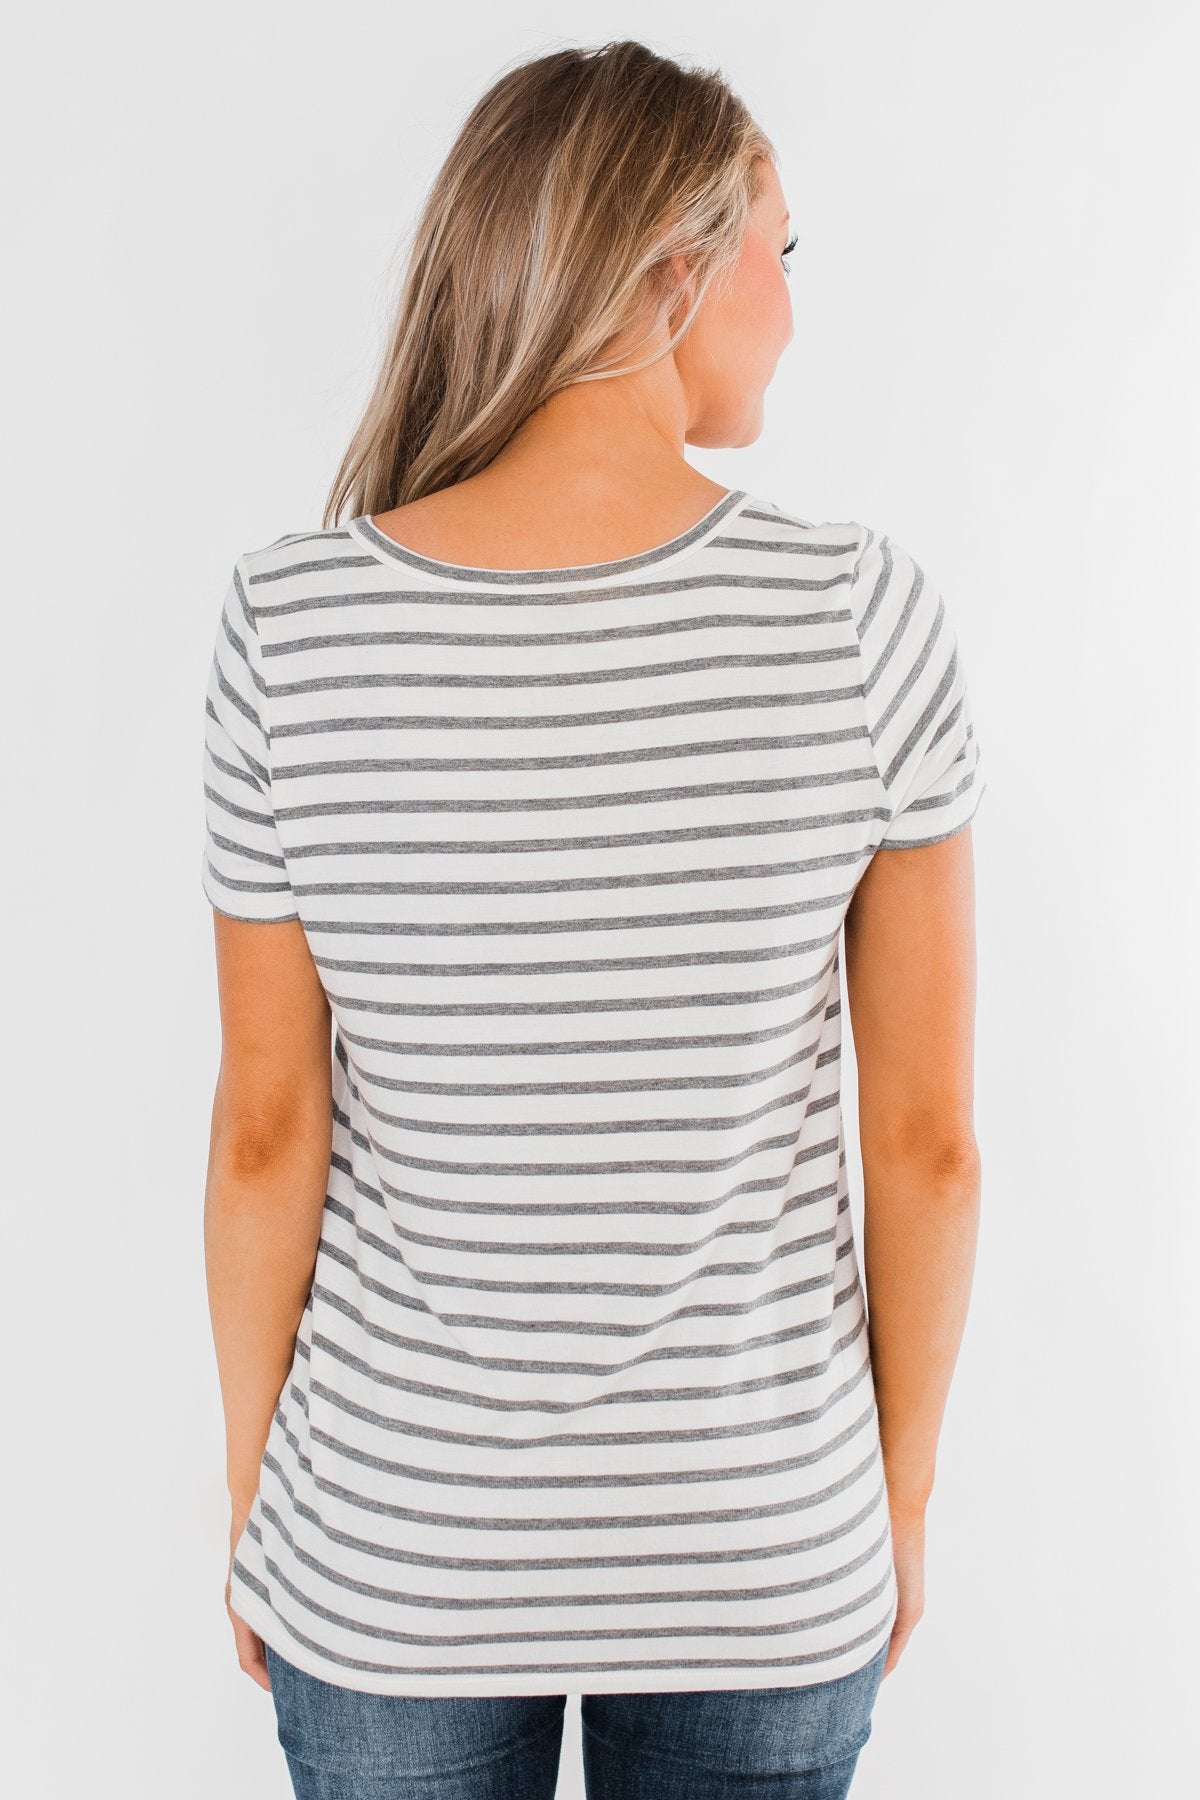 This is Me Striped Notch Pocket Top- Grey & Ivory